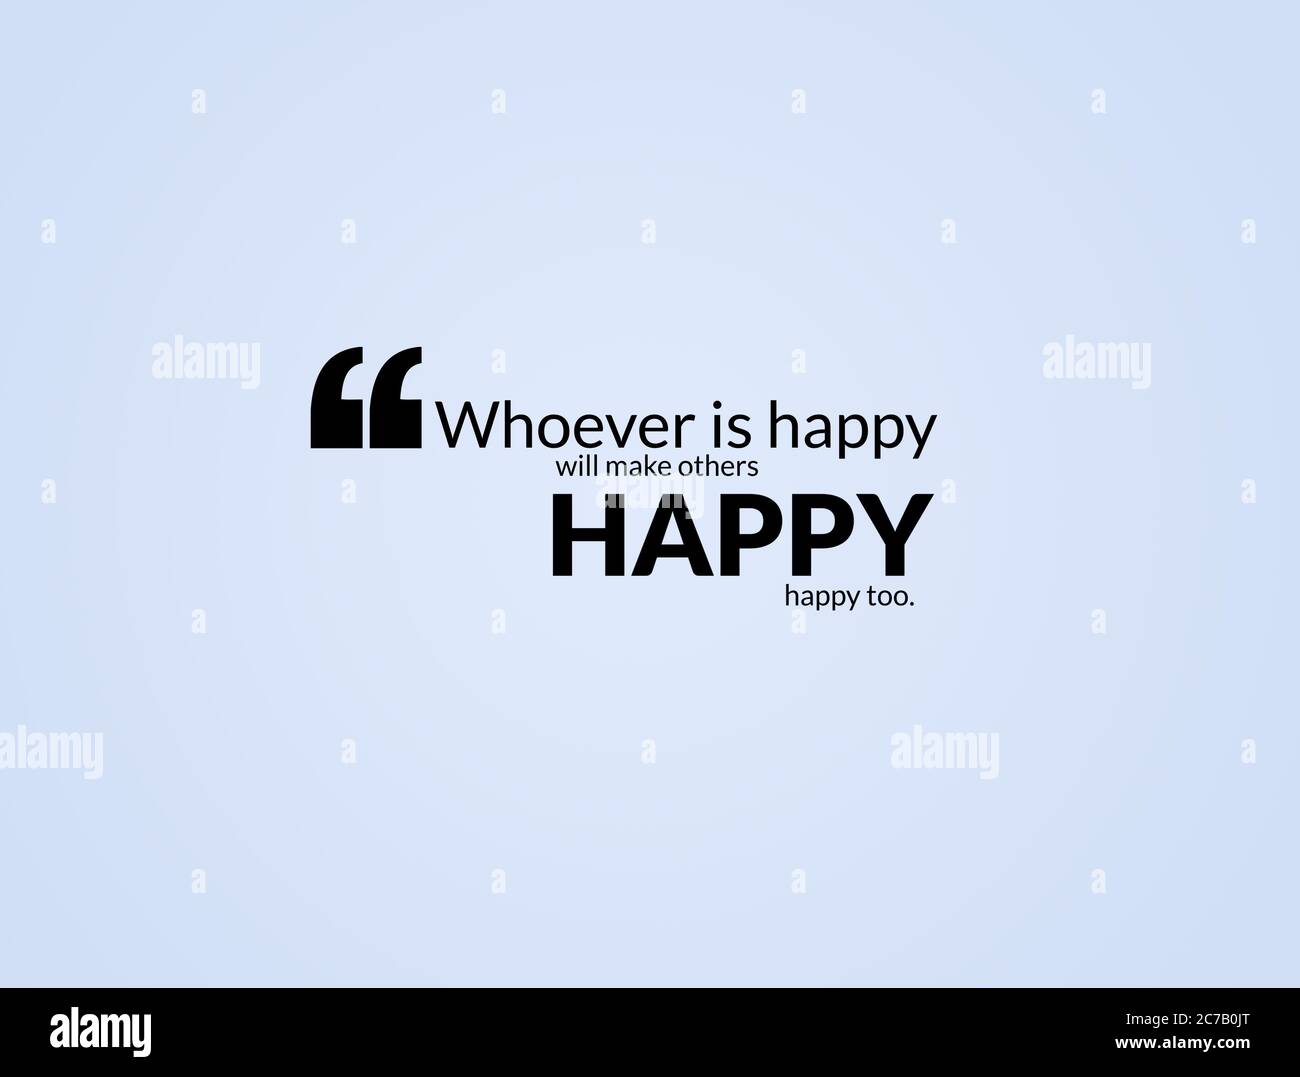 whoever is happy will make others happy too quotes illustration ...